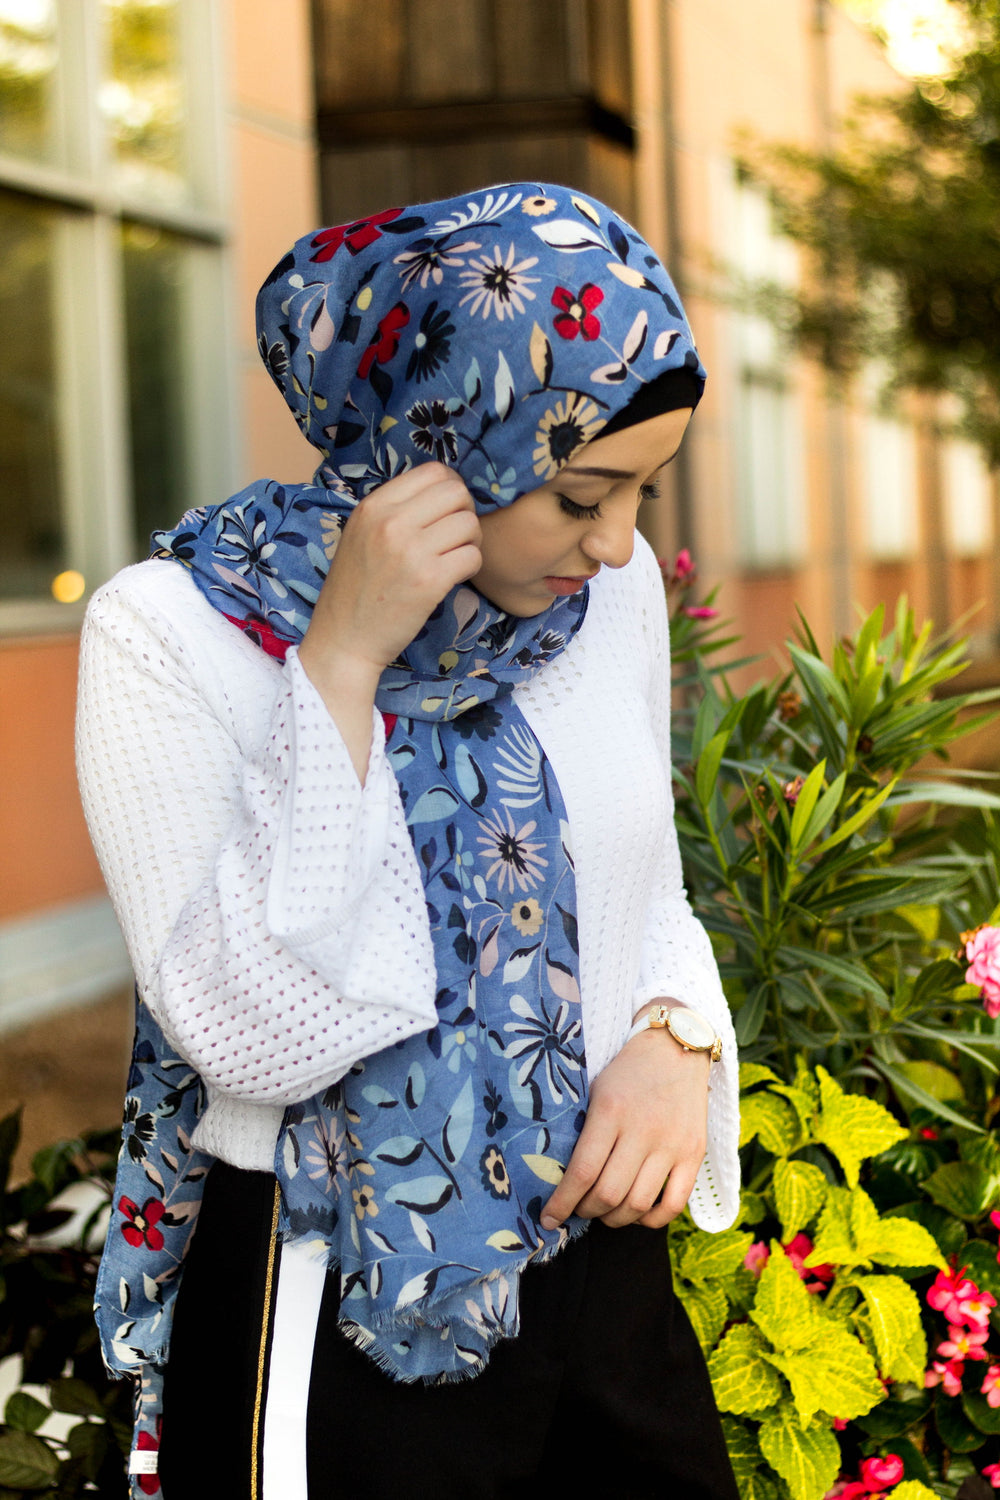 muslim woman wearing a blue hijab with floral prints in multiple colors: yellow, red, blue, green, and pink